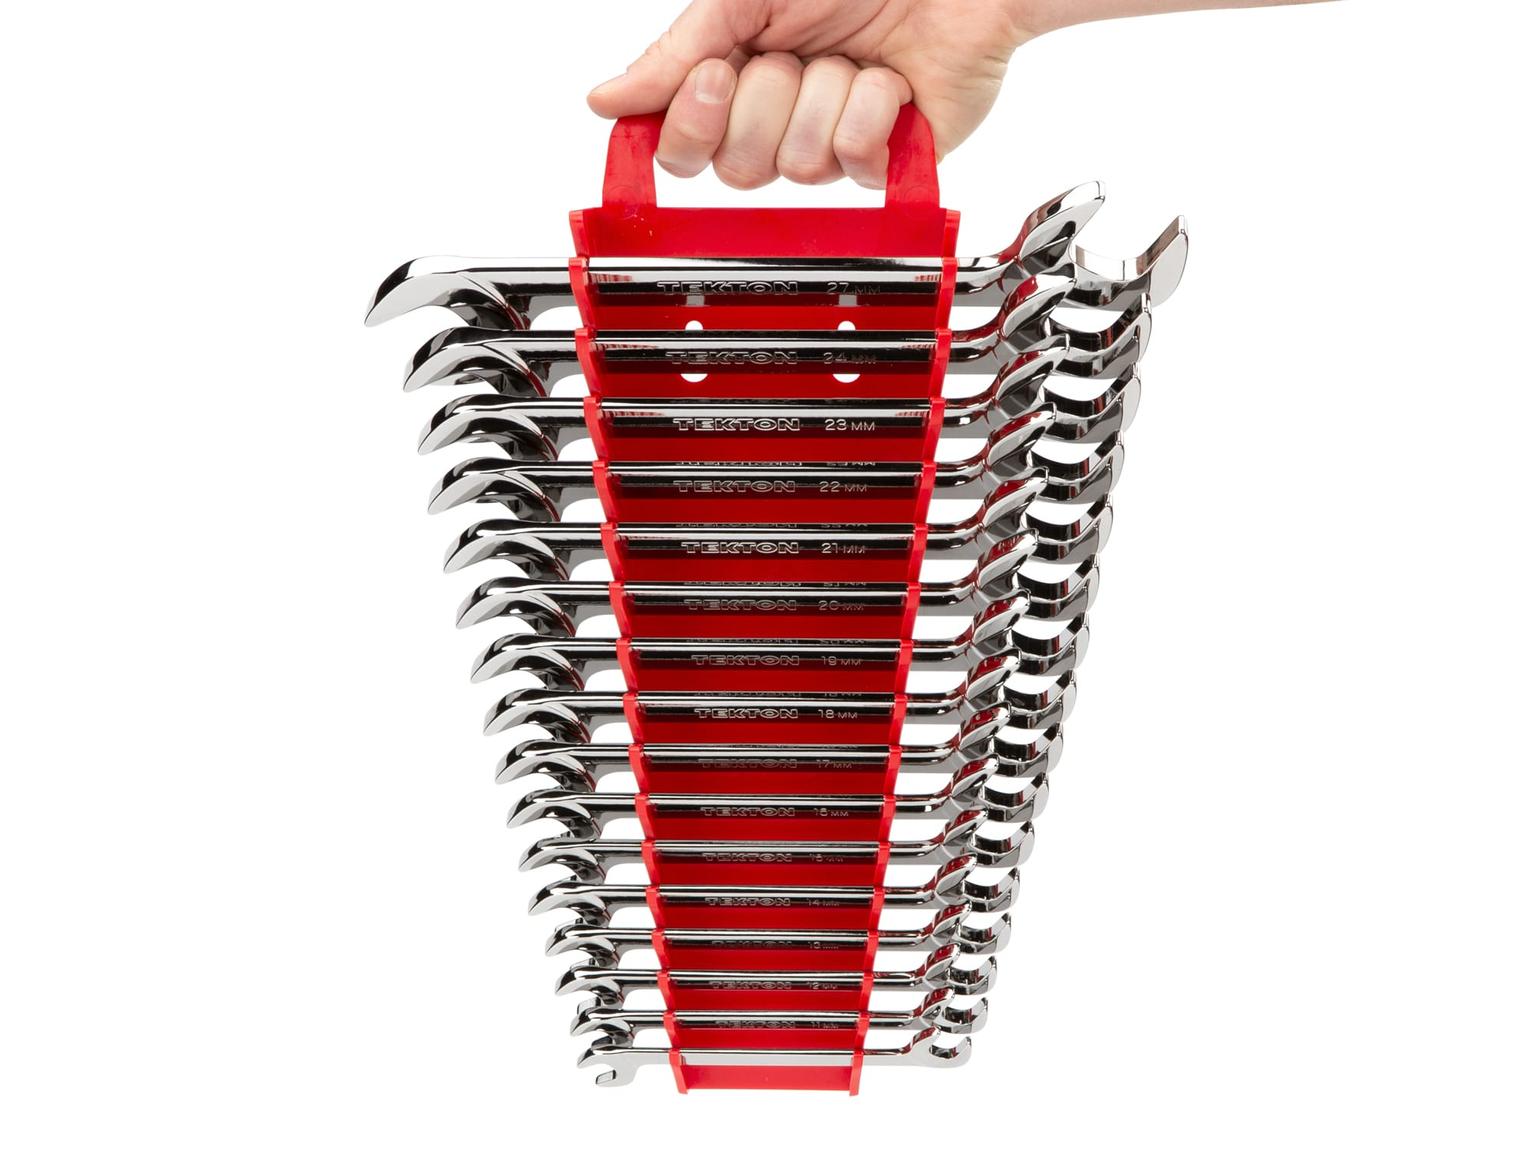 TEKTON WAE91302-T Angle Head Open End Wrench Set with Holder, 27-Piece (3/8 - 1 in., 10 - 27 mm)